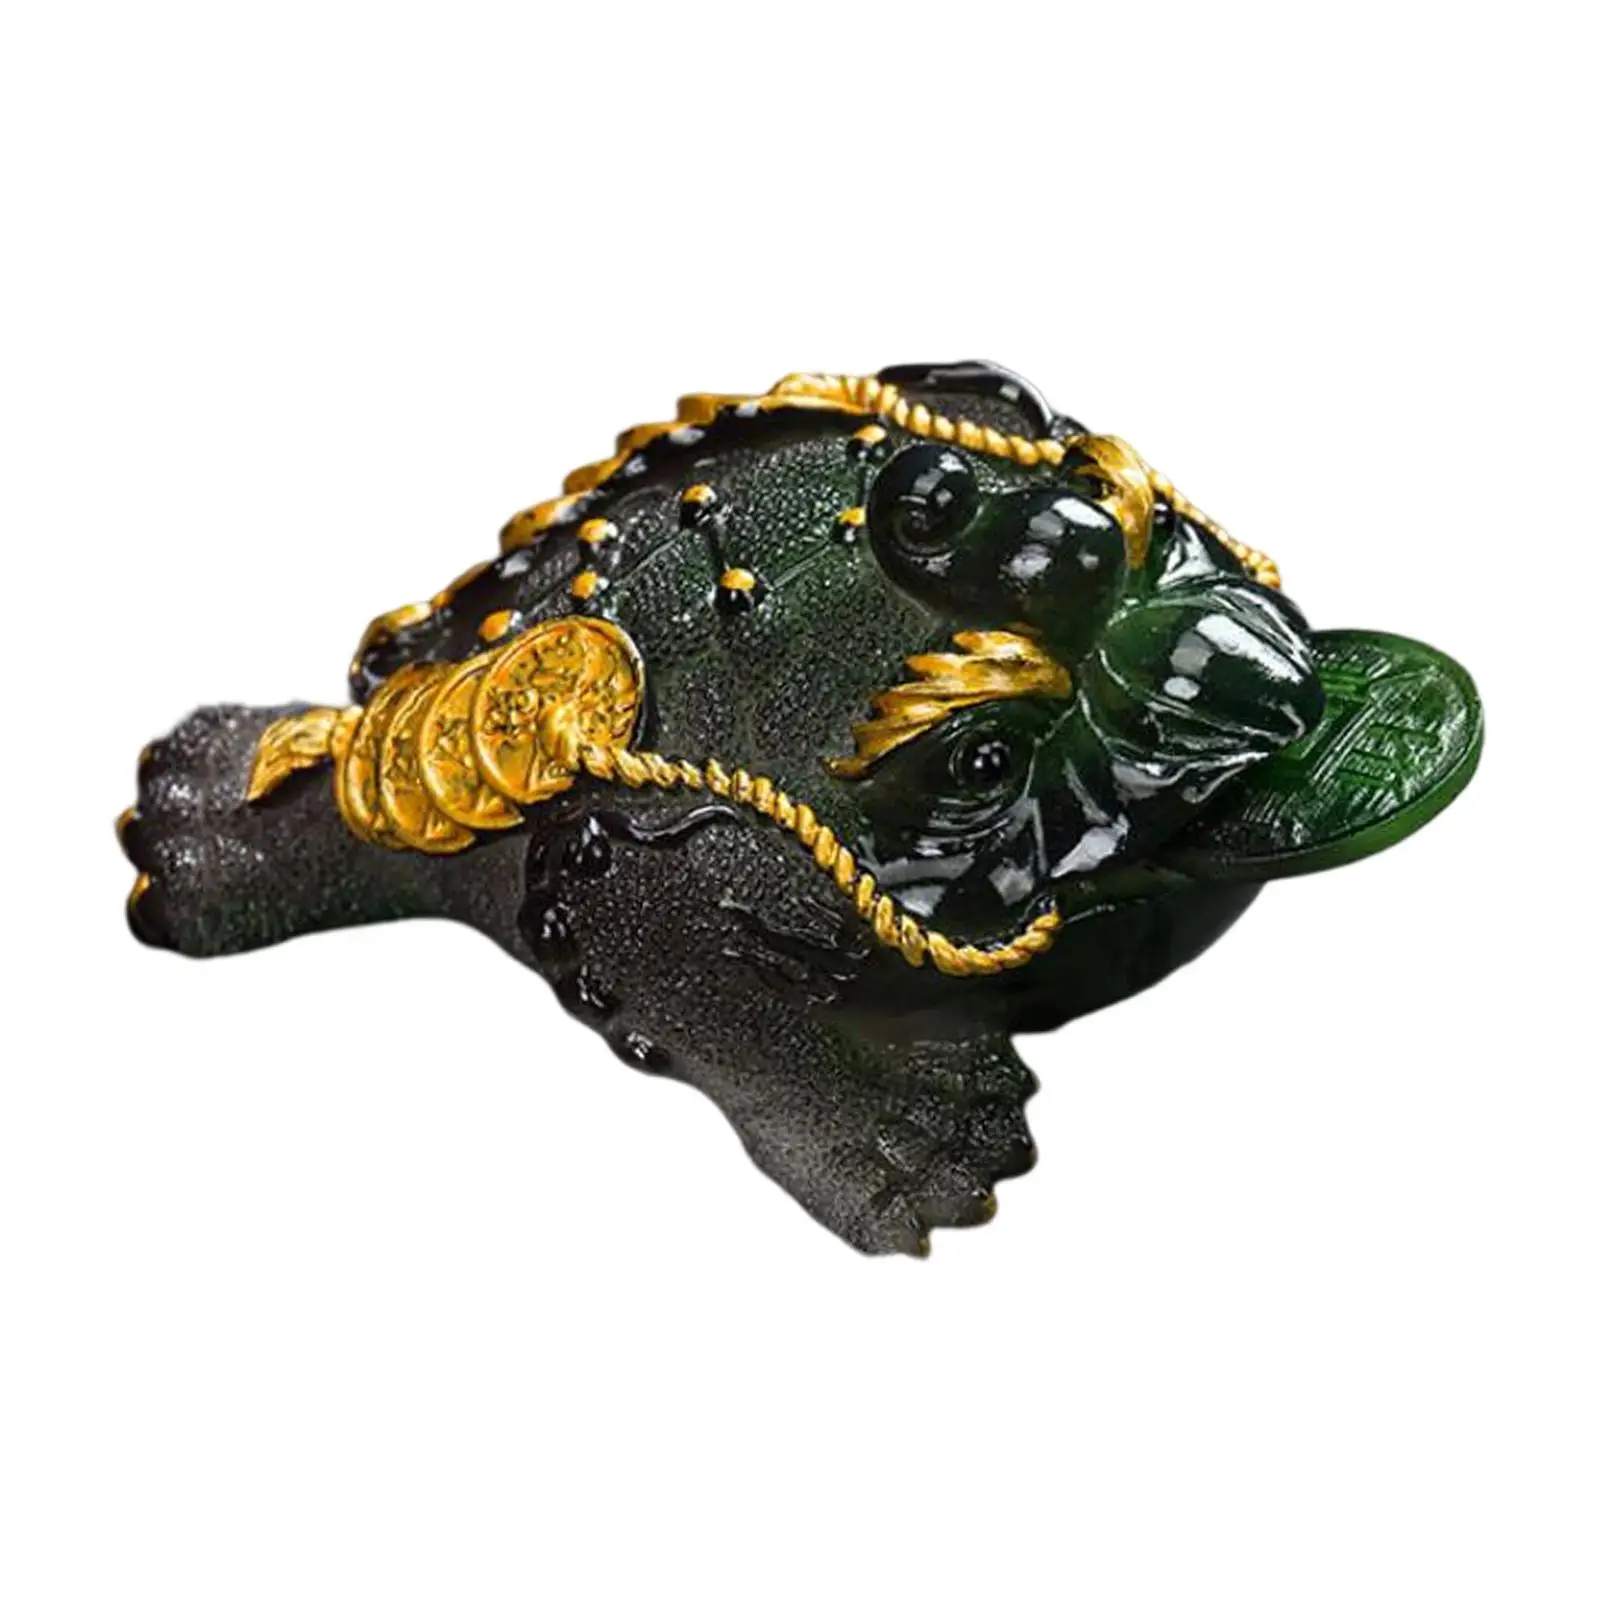 Changing Color Toad Figurine Fortune Resin Crafts Tea Pet Ornament Luck Toad for Tea Table Tea Tray Tea Accessories Decor